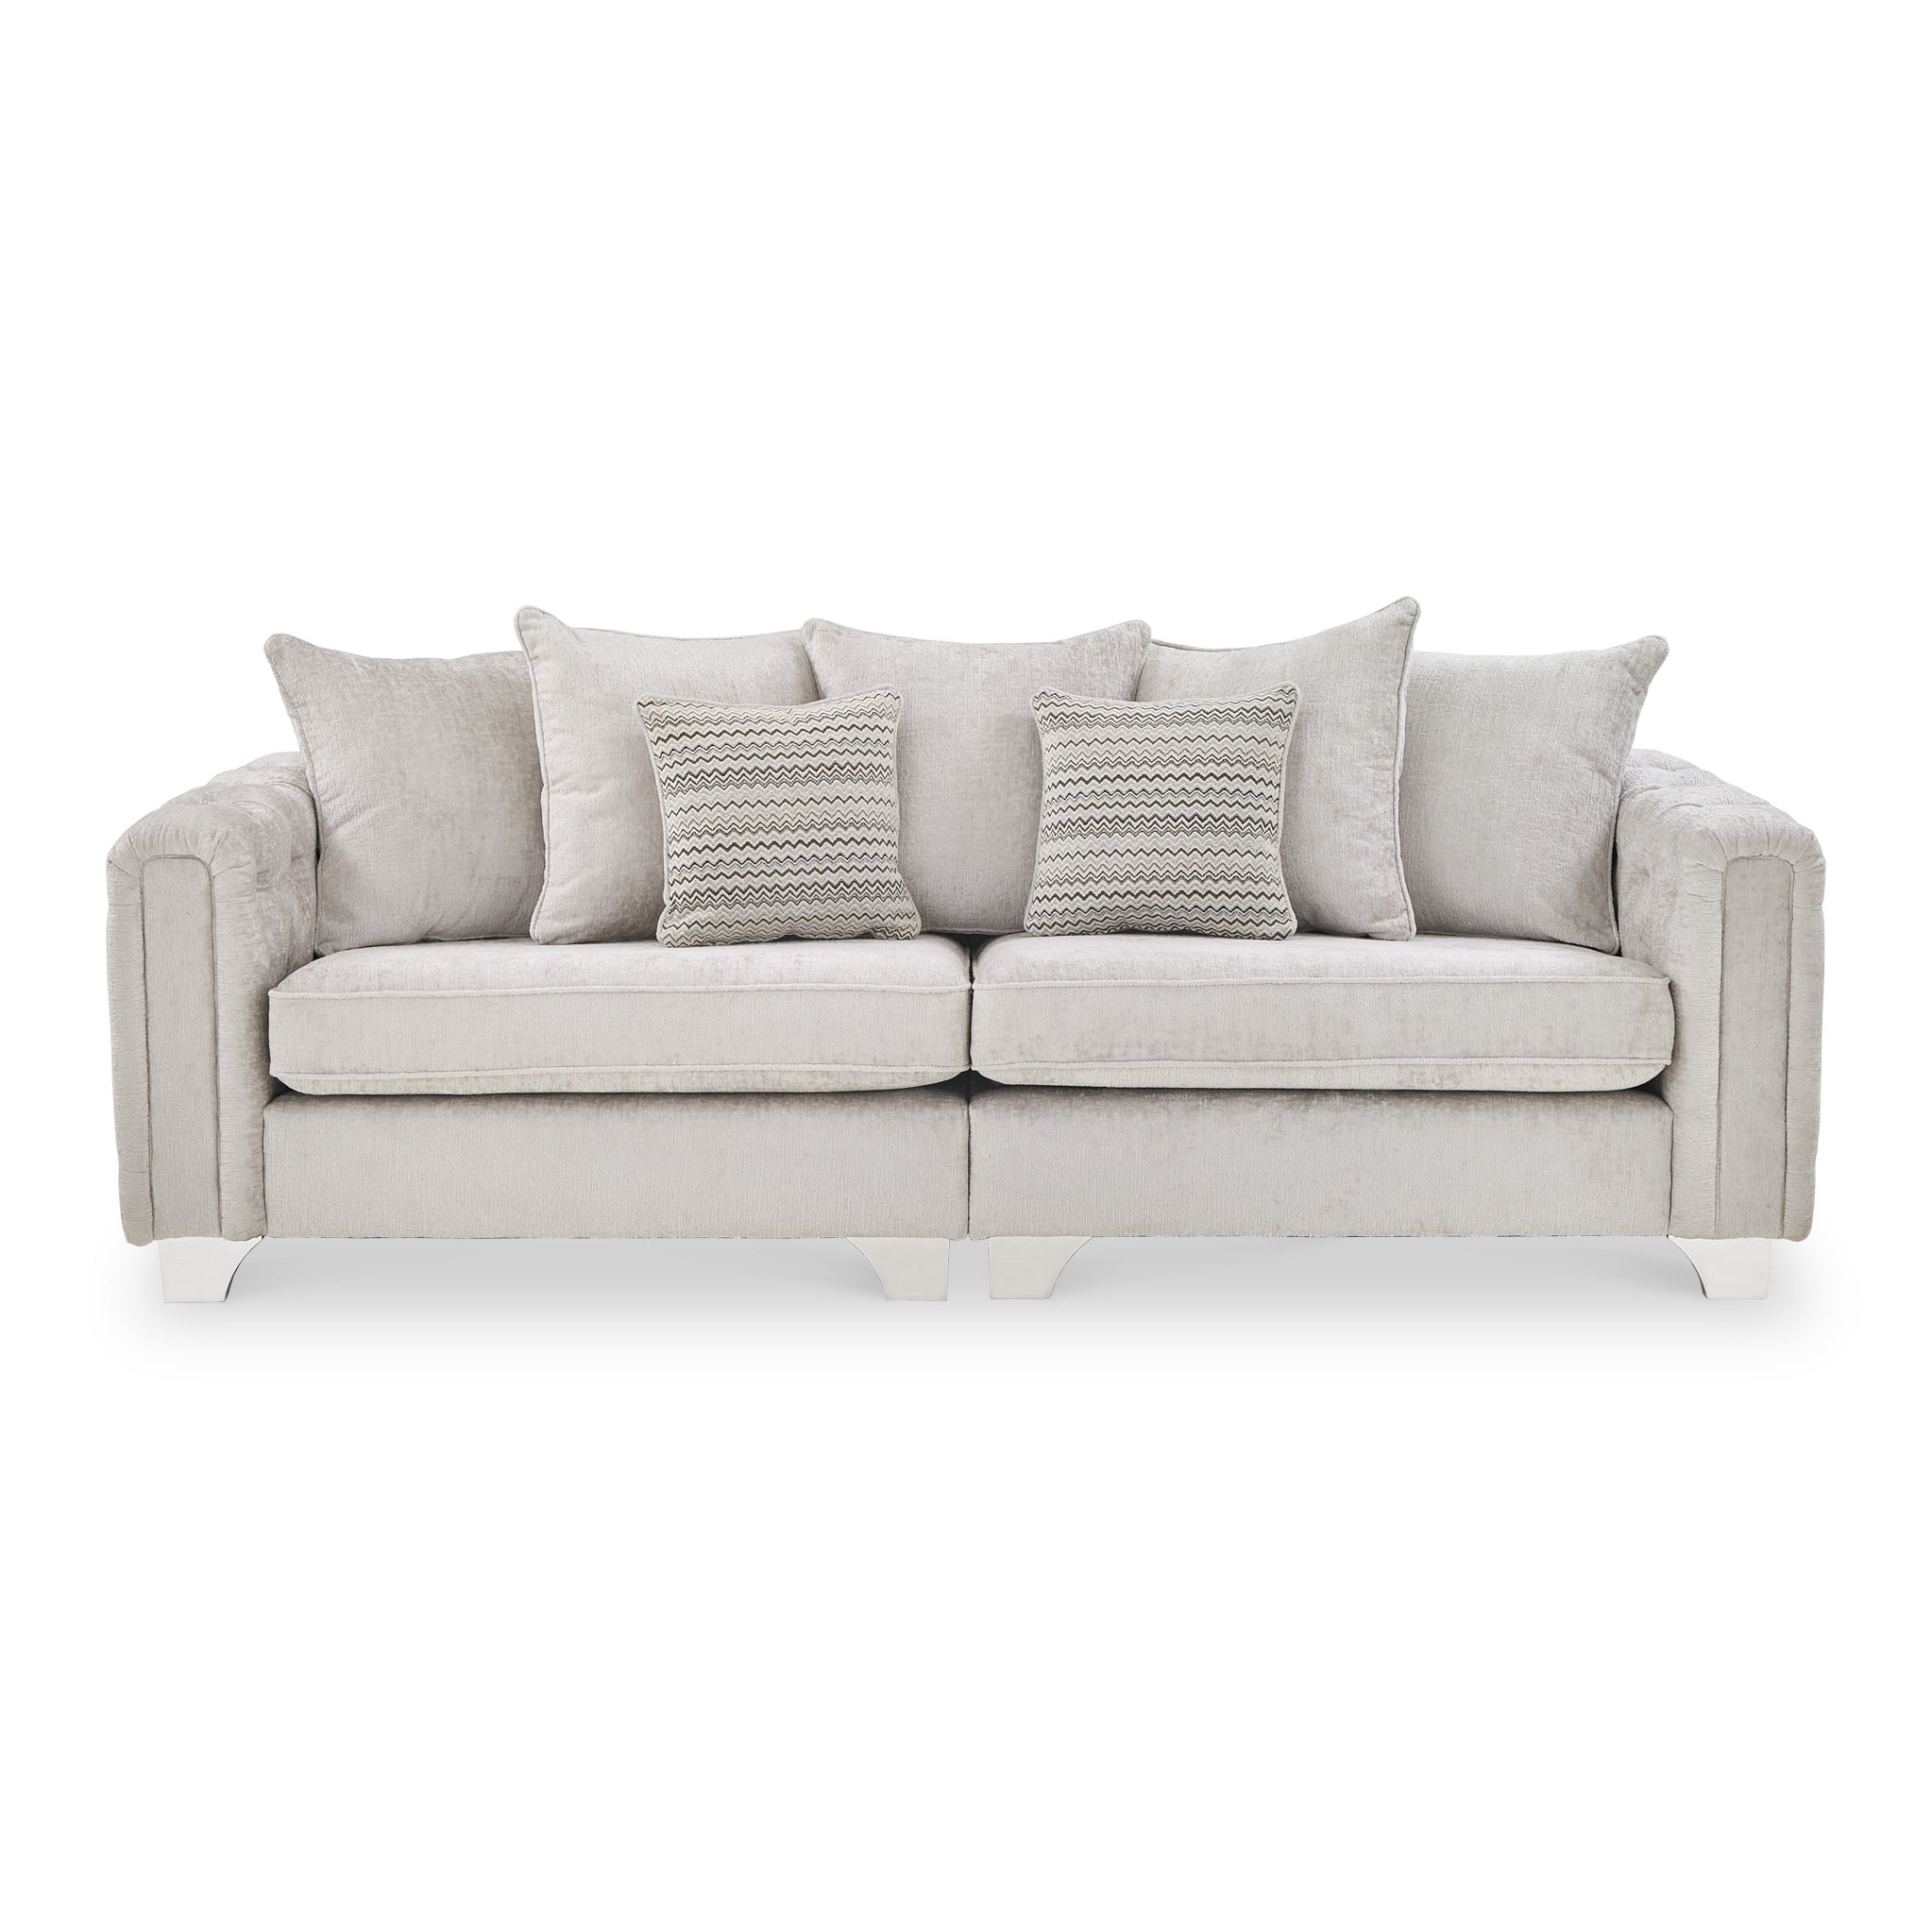 Grazia Grey Chenille 4 Seater Sofa With Buttoned Tuft Arms Roseland